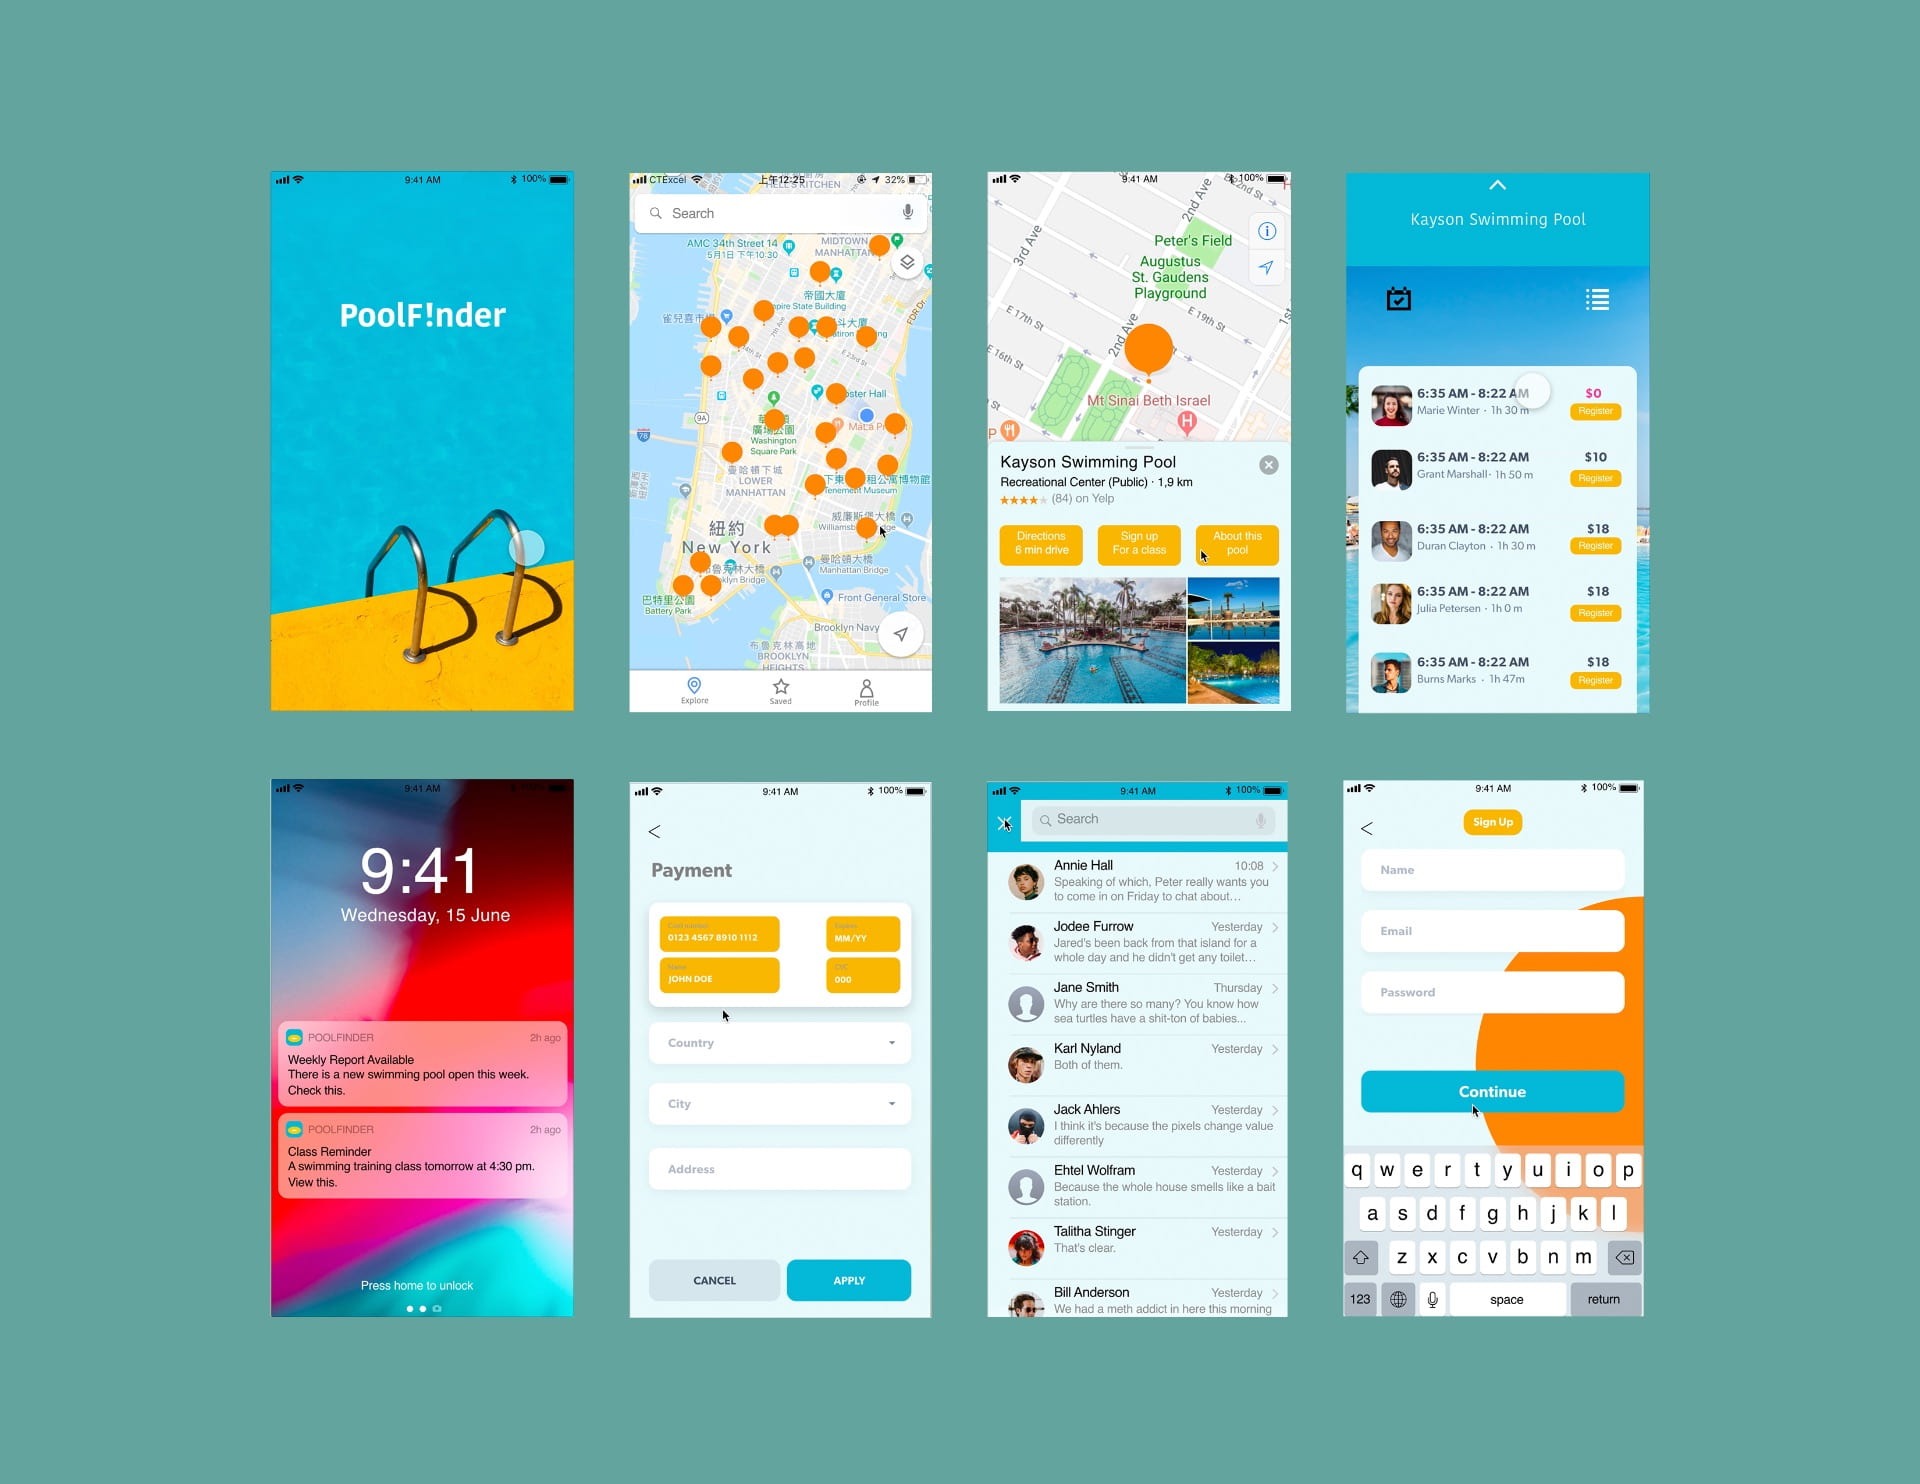 “PoolFinder”: a service design product aiming to assist people to find available swimming pool nearby